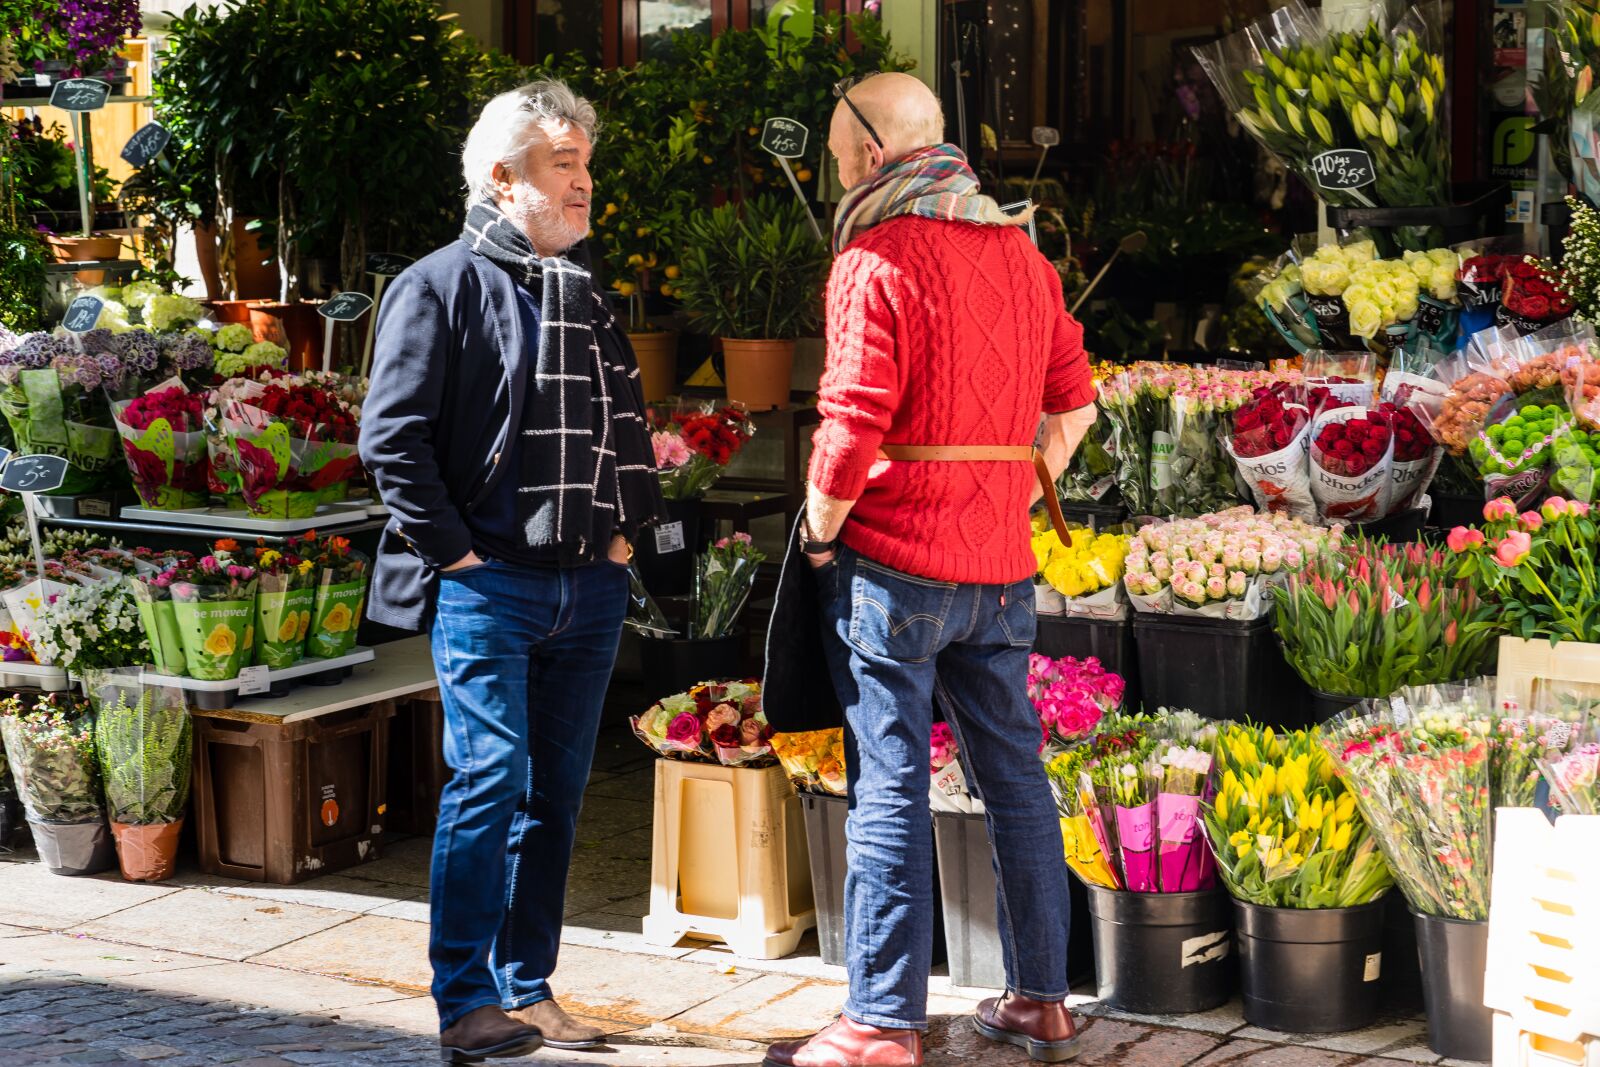 Sony a7 II sample photo. Rue cler, flowers, street photography